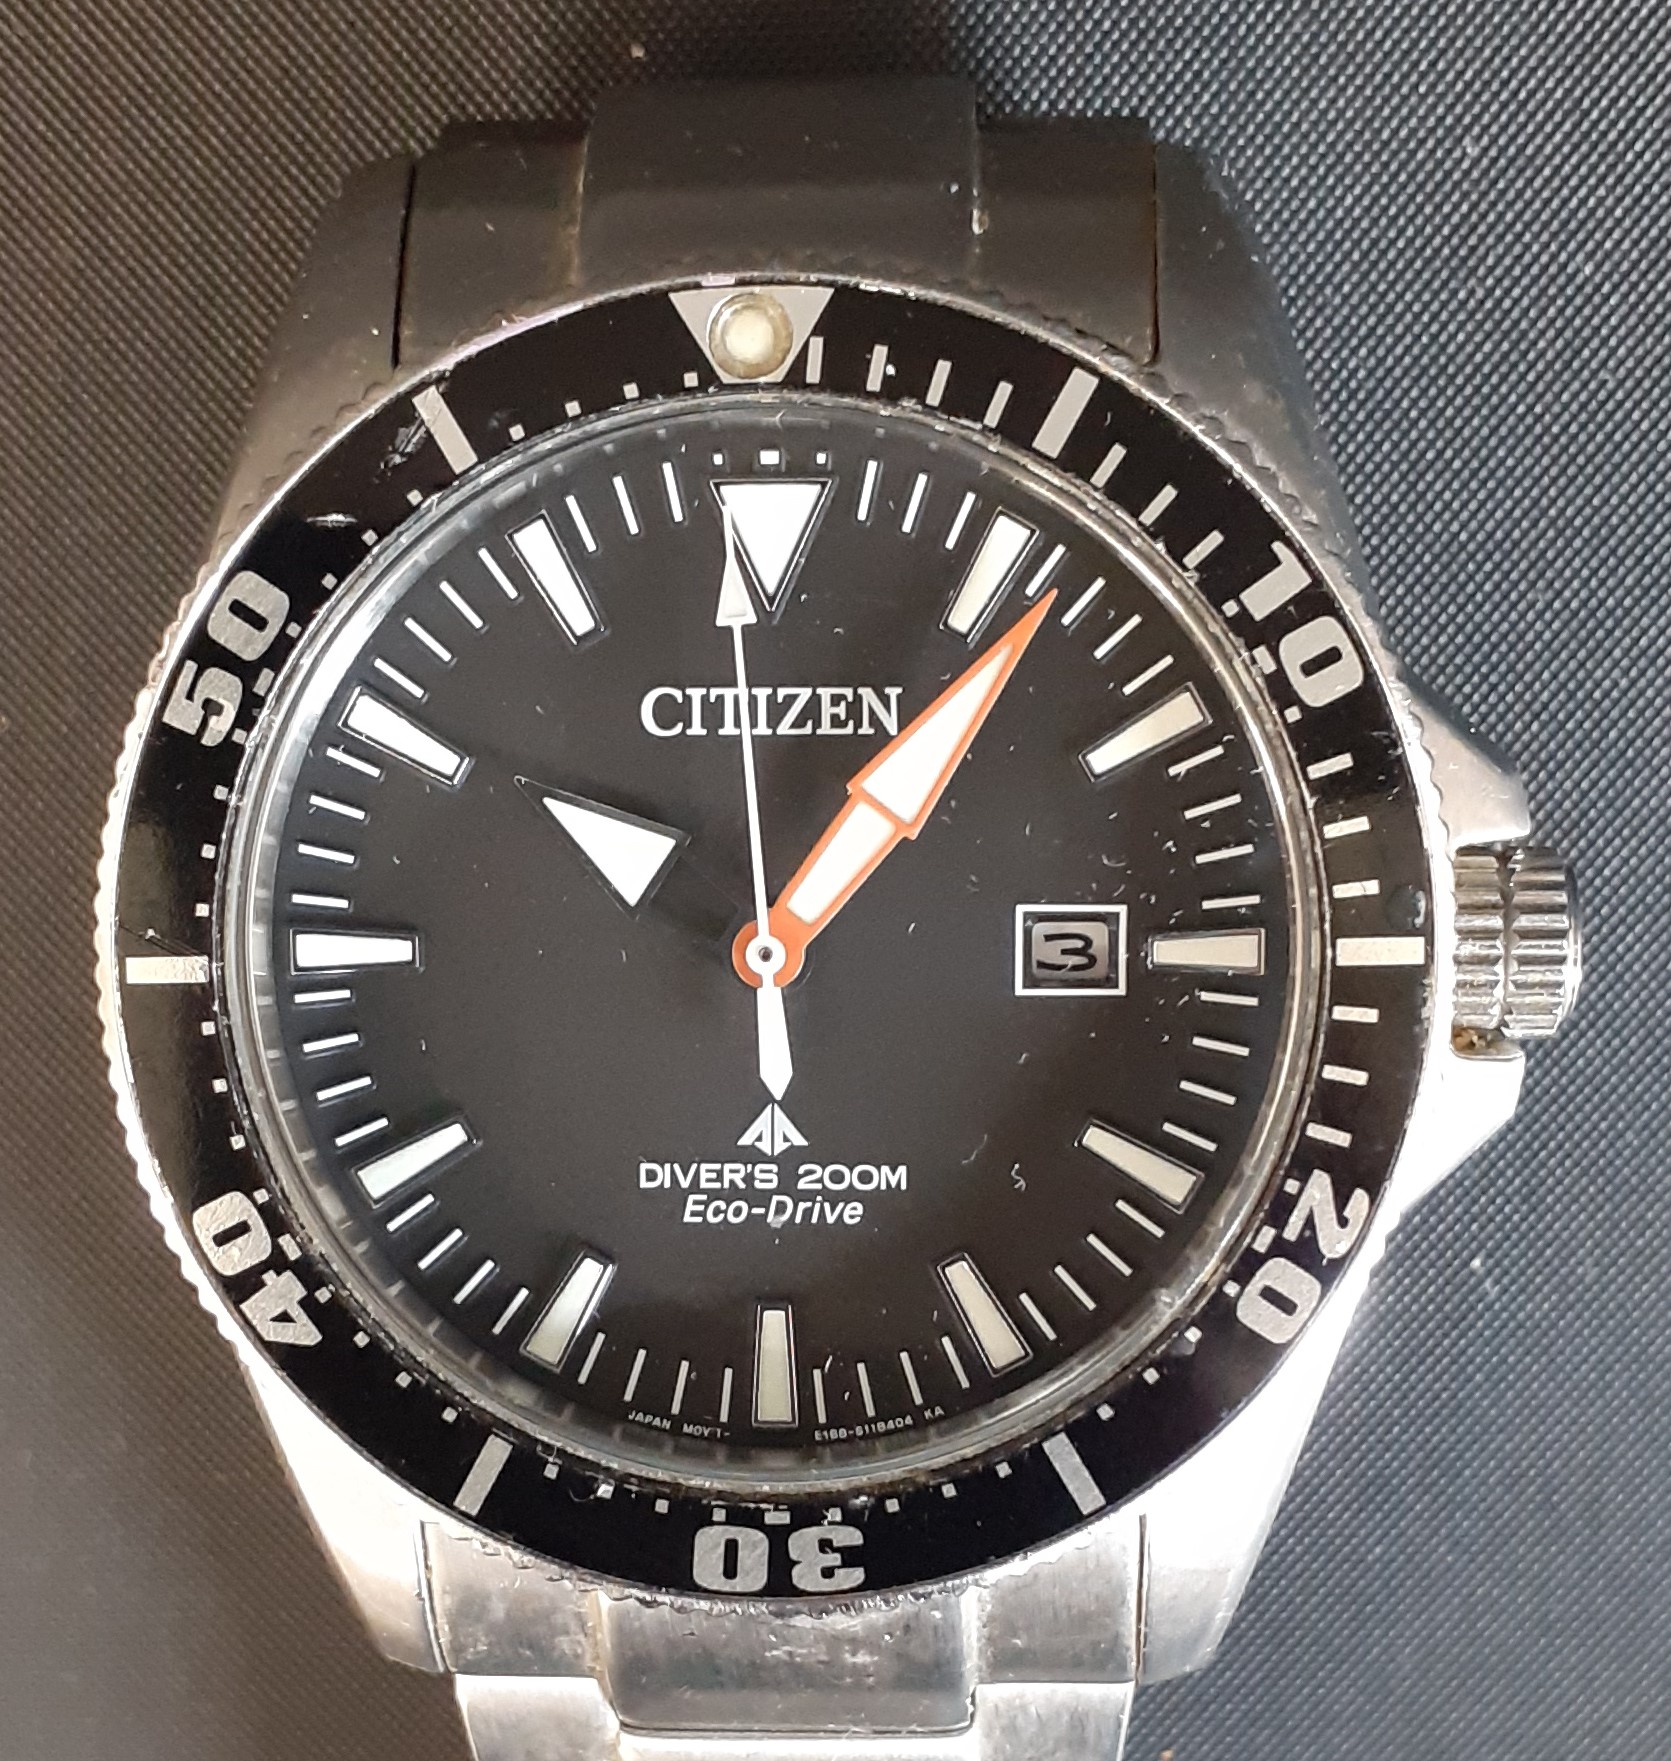 Citizen Promaster Eco-Drive Diver's 200m wristwatch with date aperture, hands and hour markers,